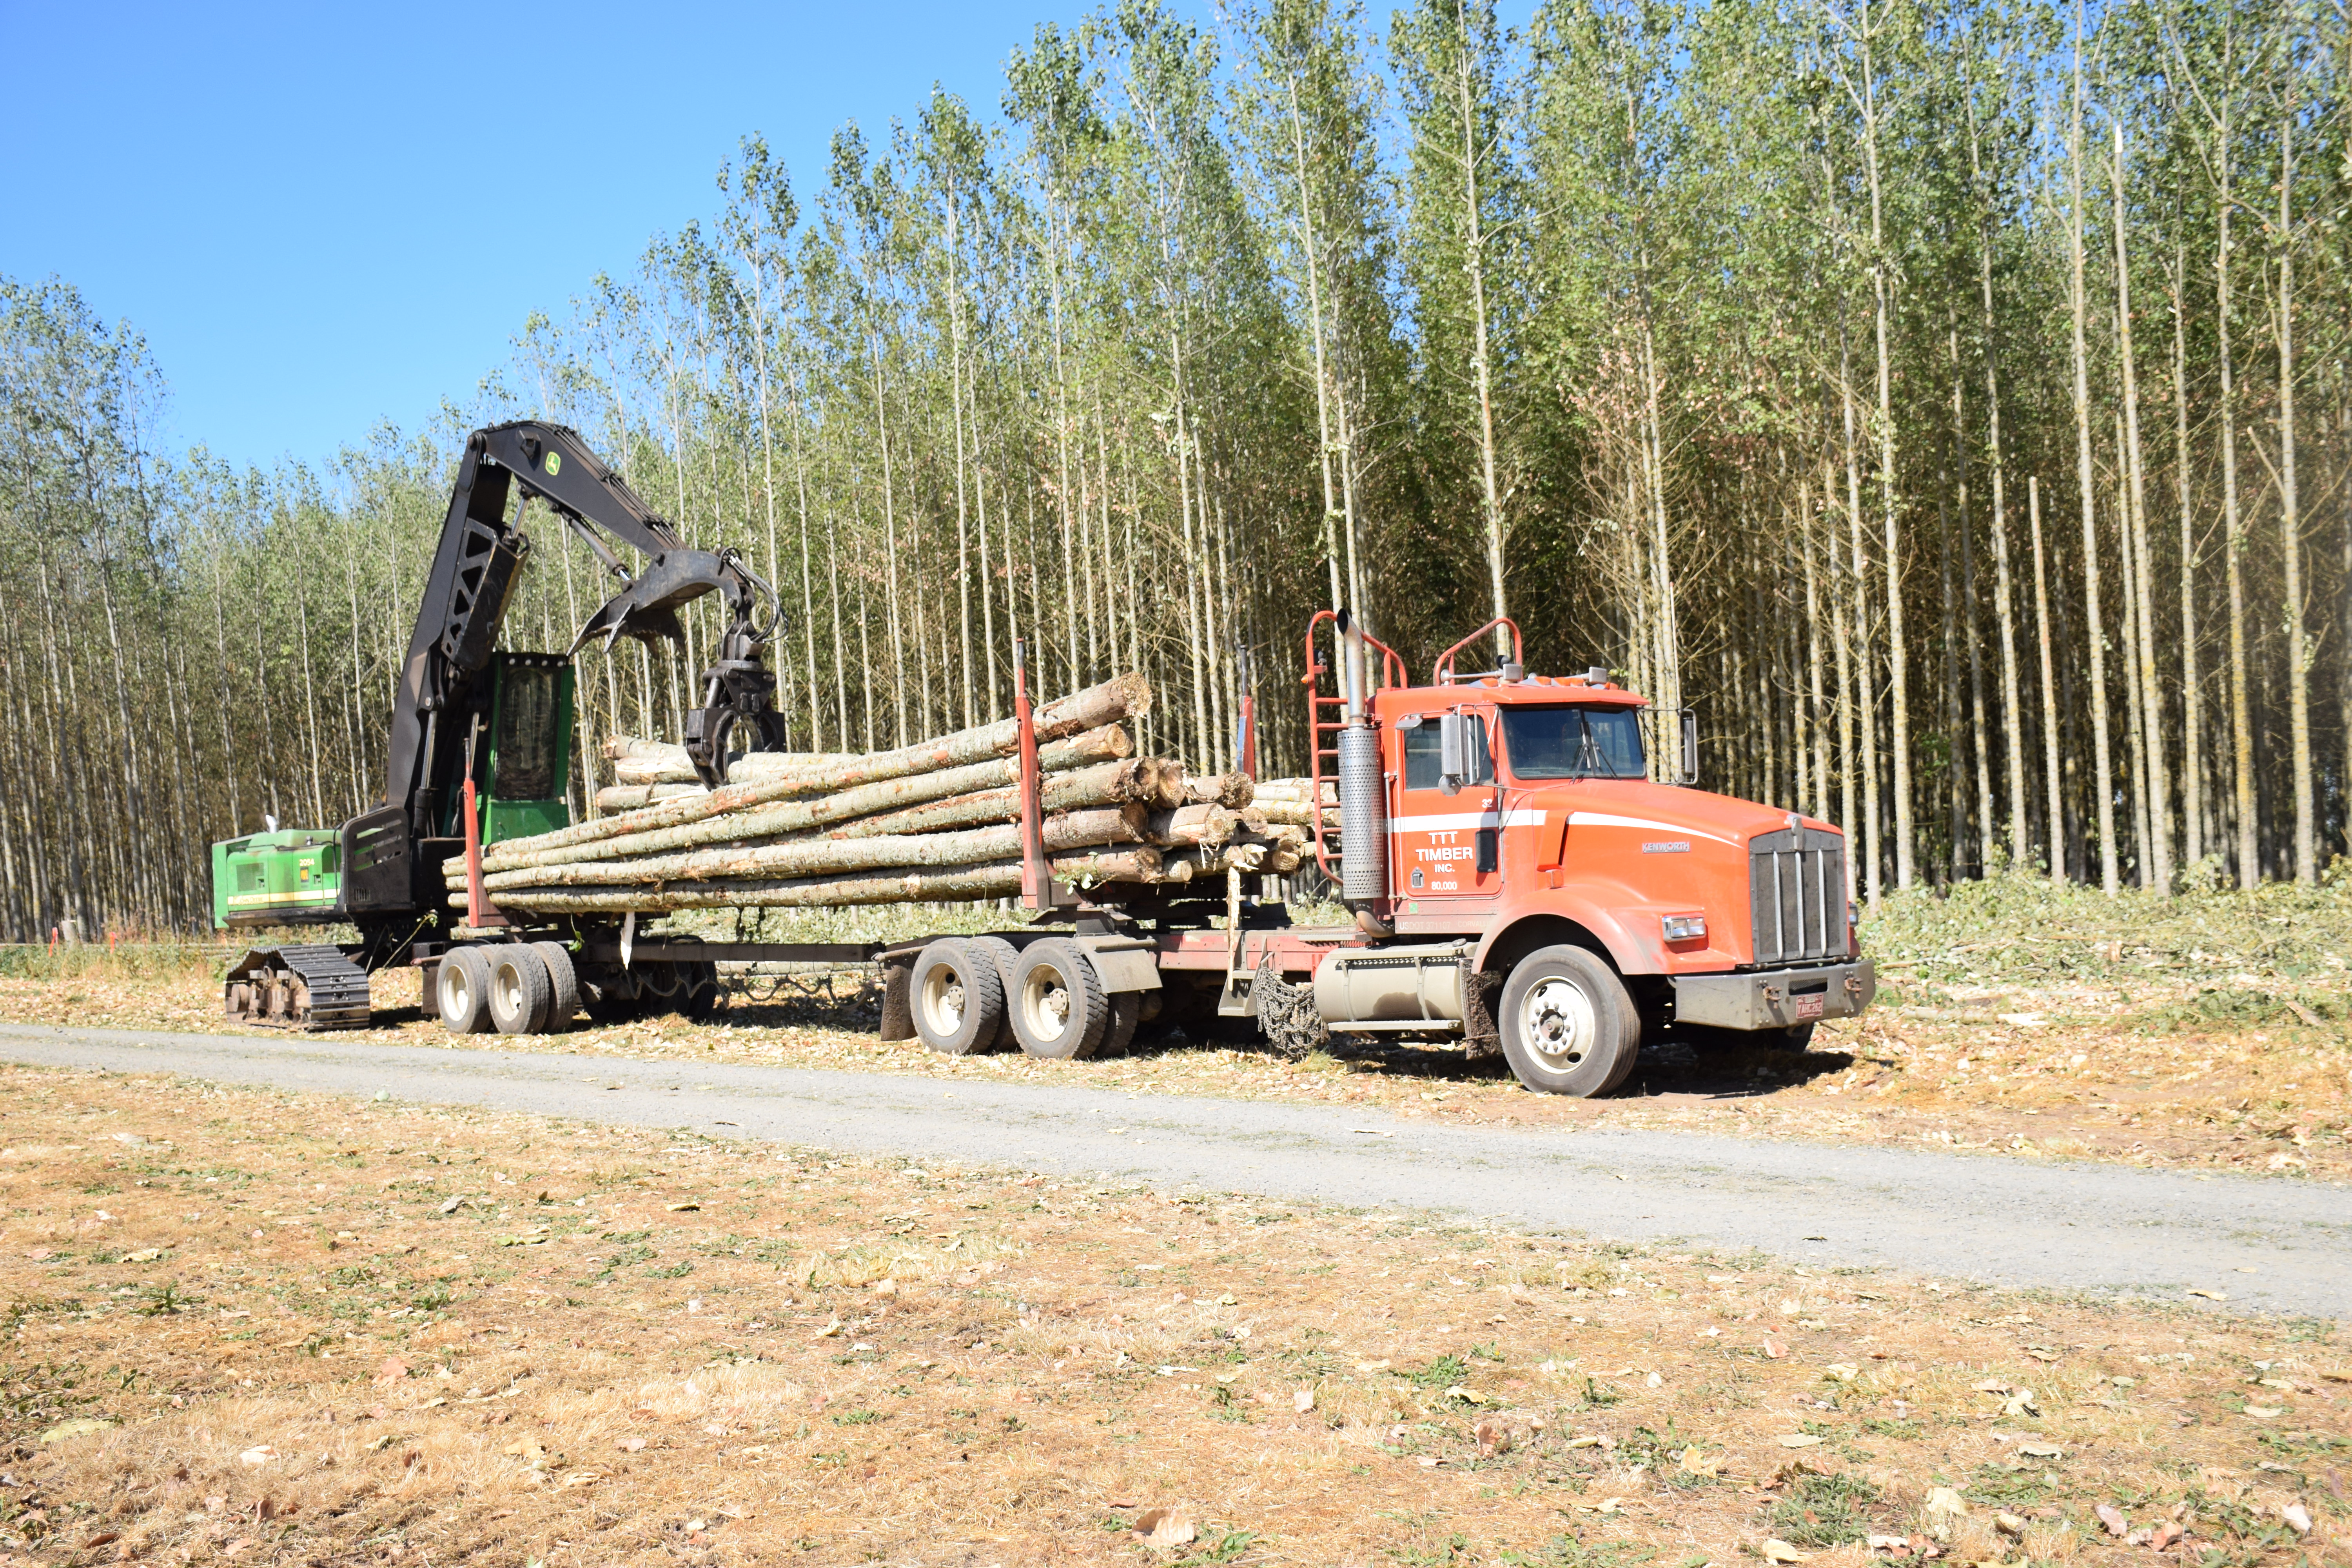 Log Truck with harvested poplar trees